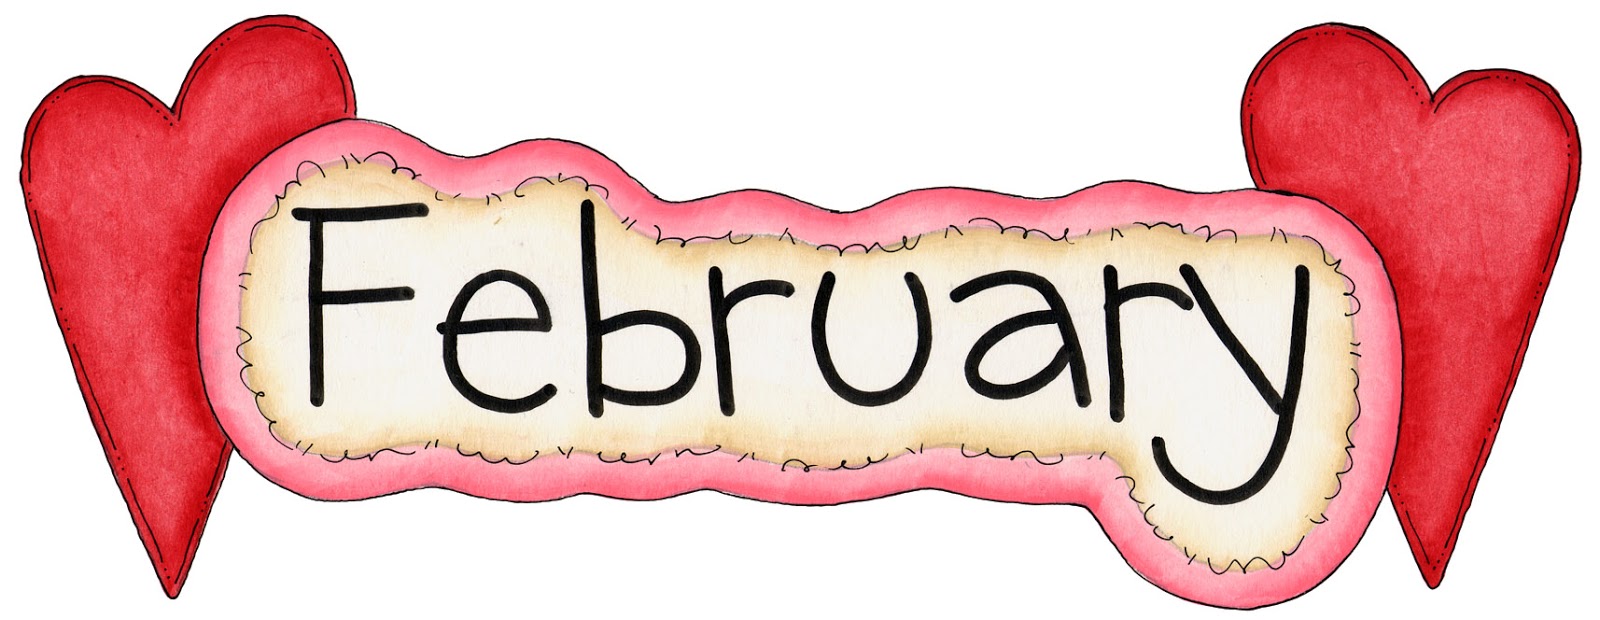 Free cliparts download clip. 2016 clipart february